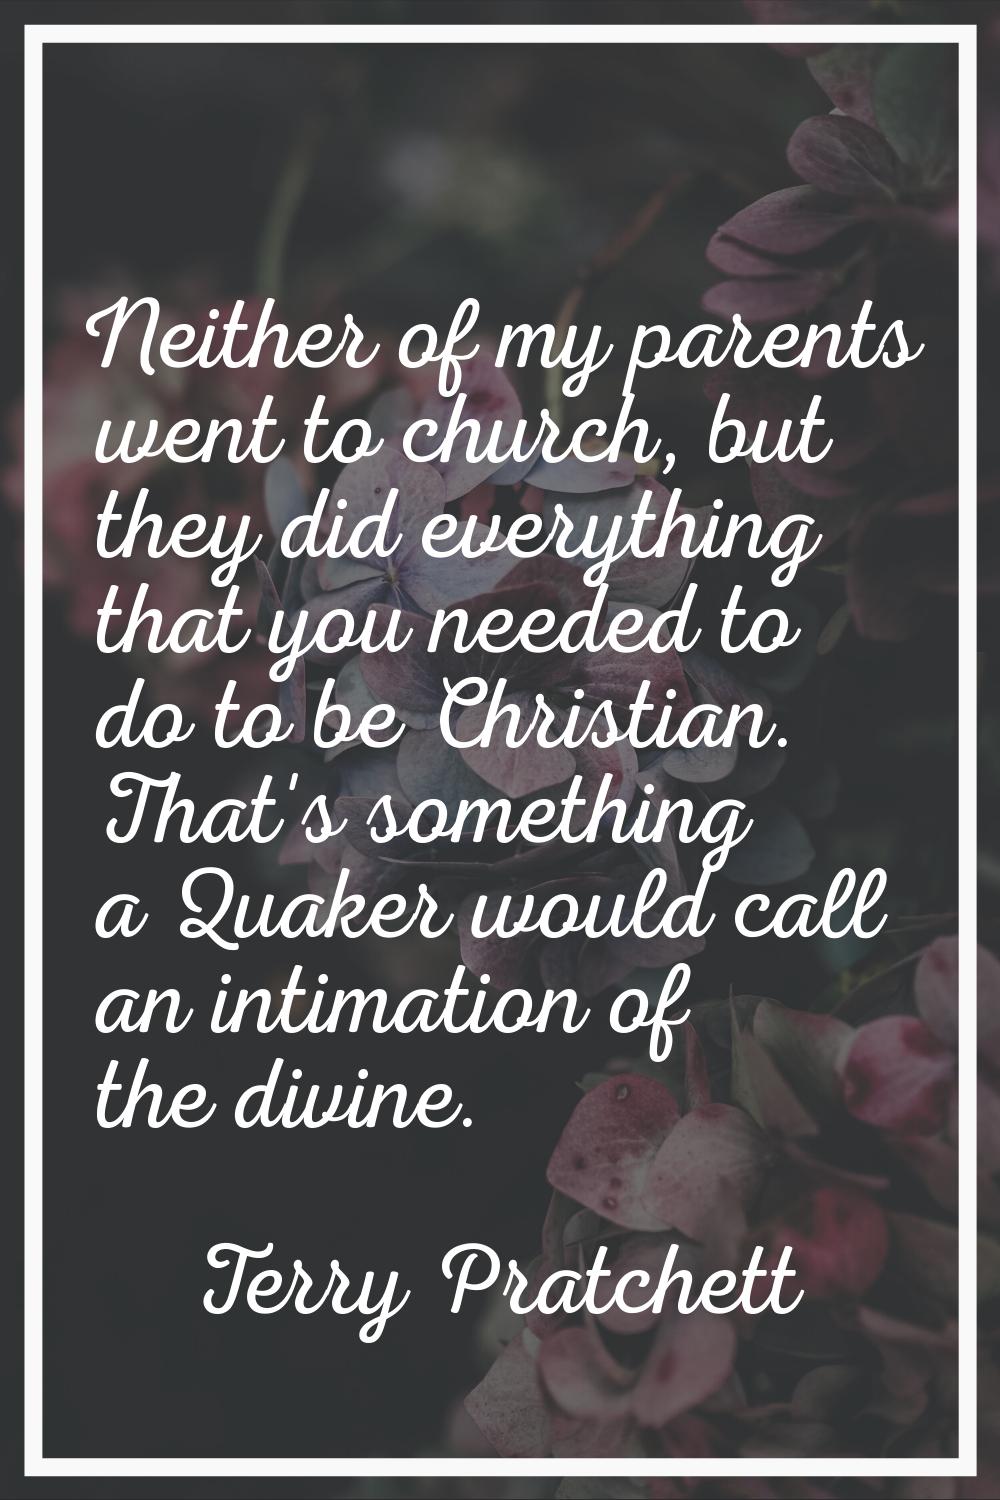 Neither of my parents went to church, but they did everything that you needed to do to be Christian